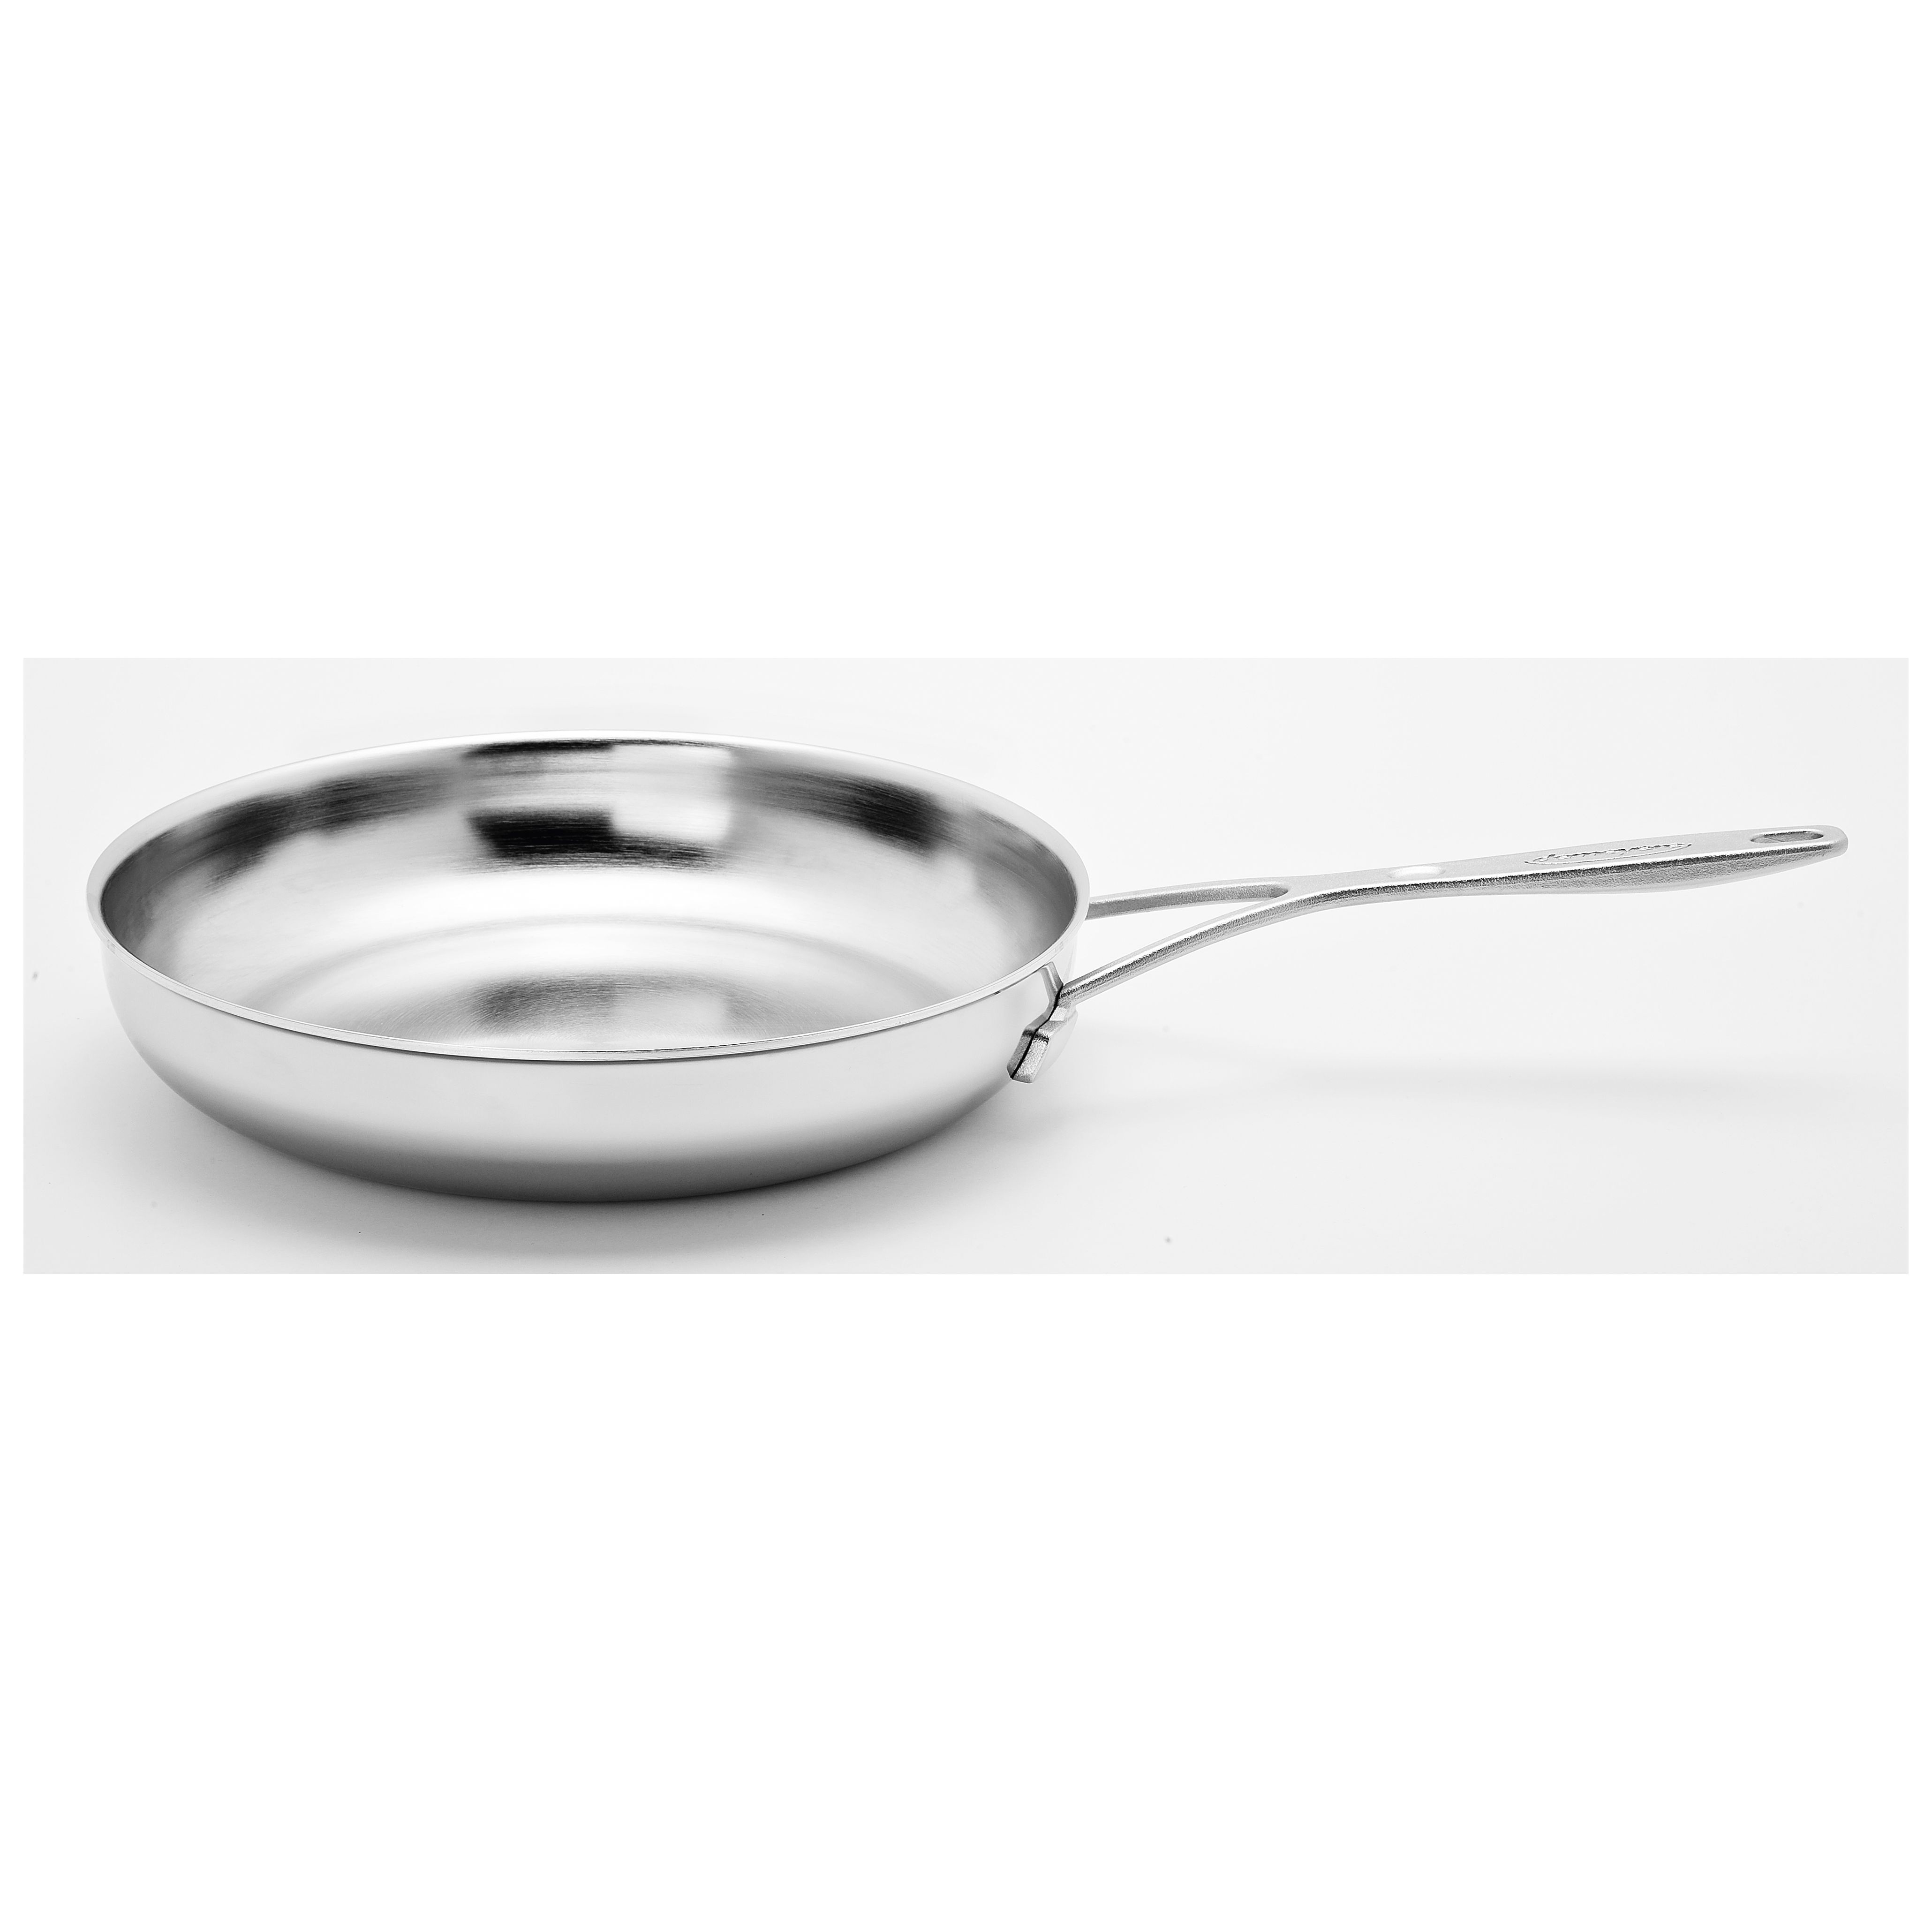 5 inch frying pan with lid